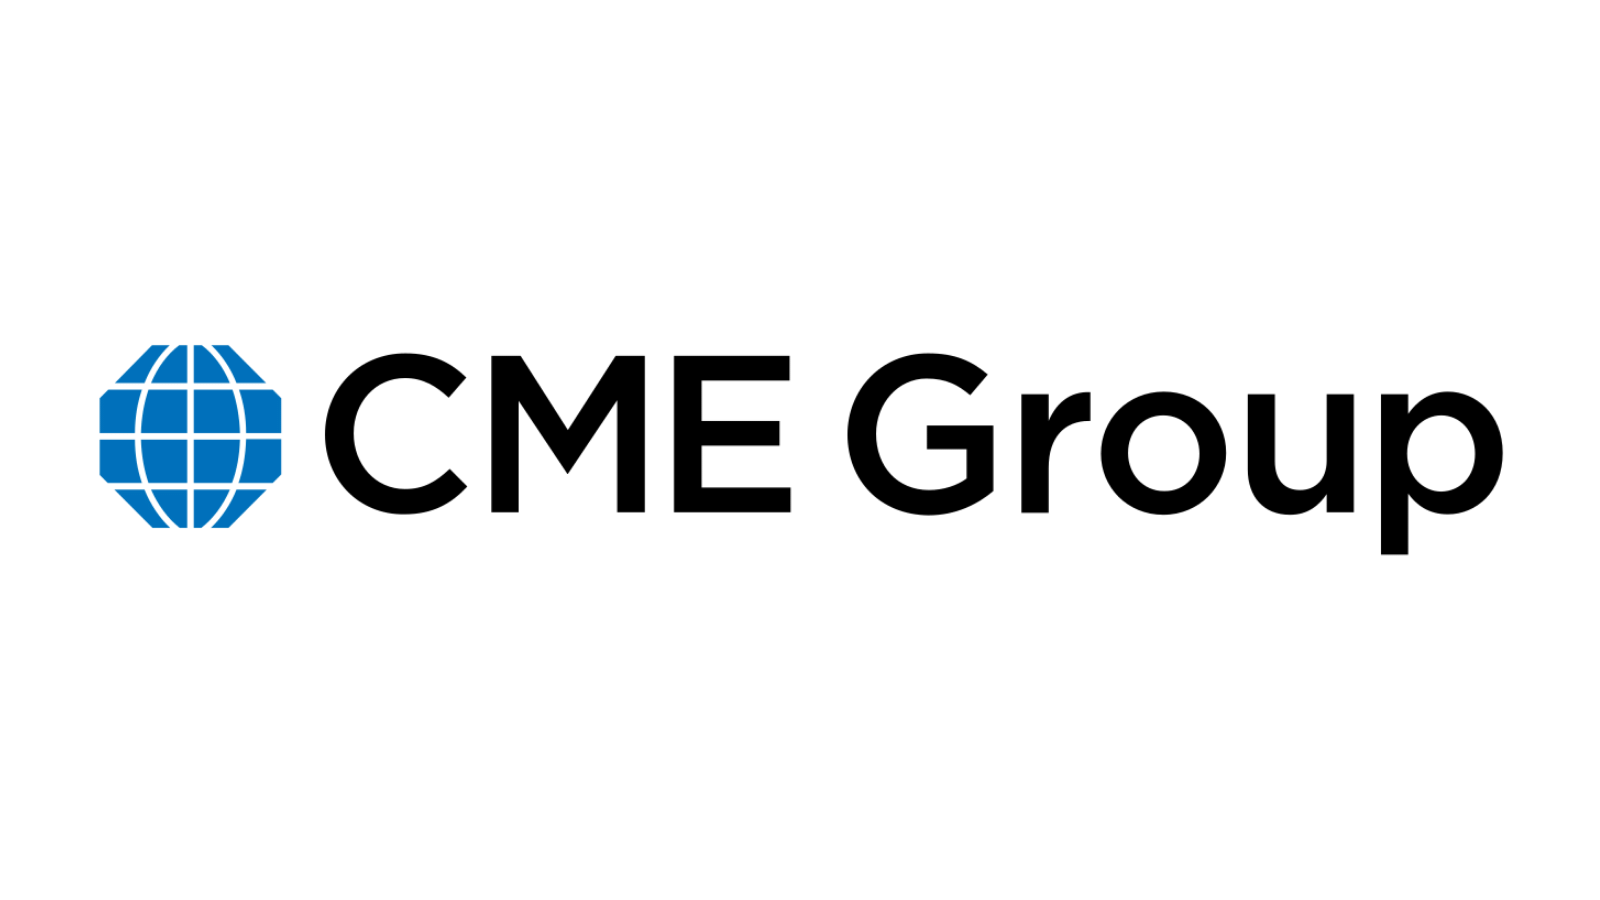 CME Group Announces Management Changes To Strengthen Focus on International Business Growth